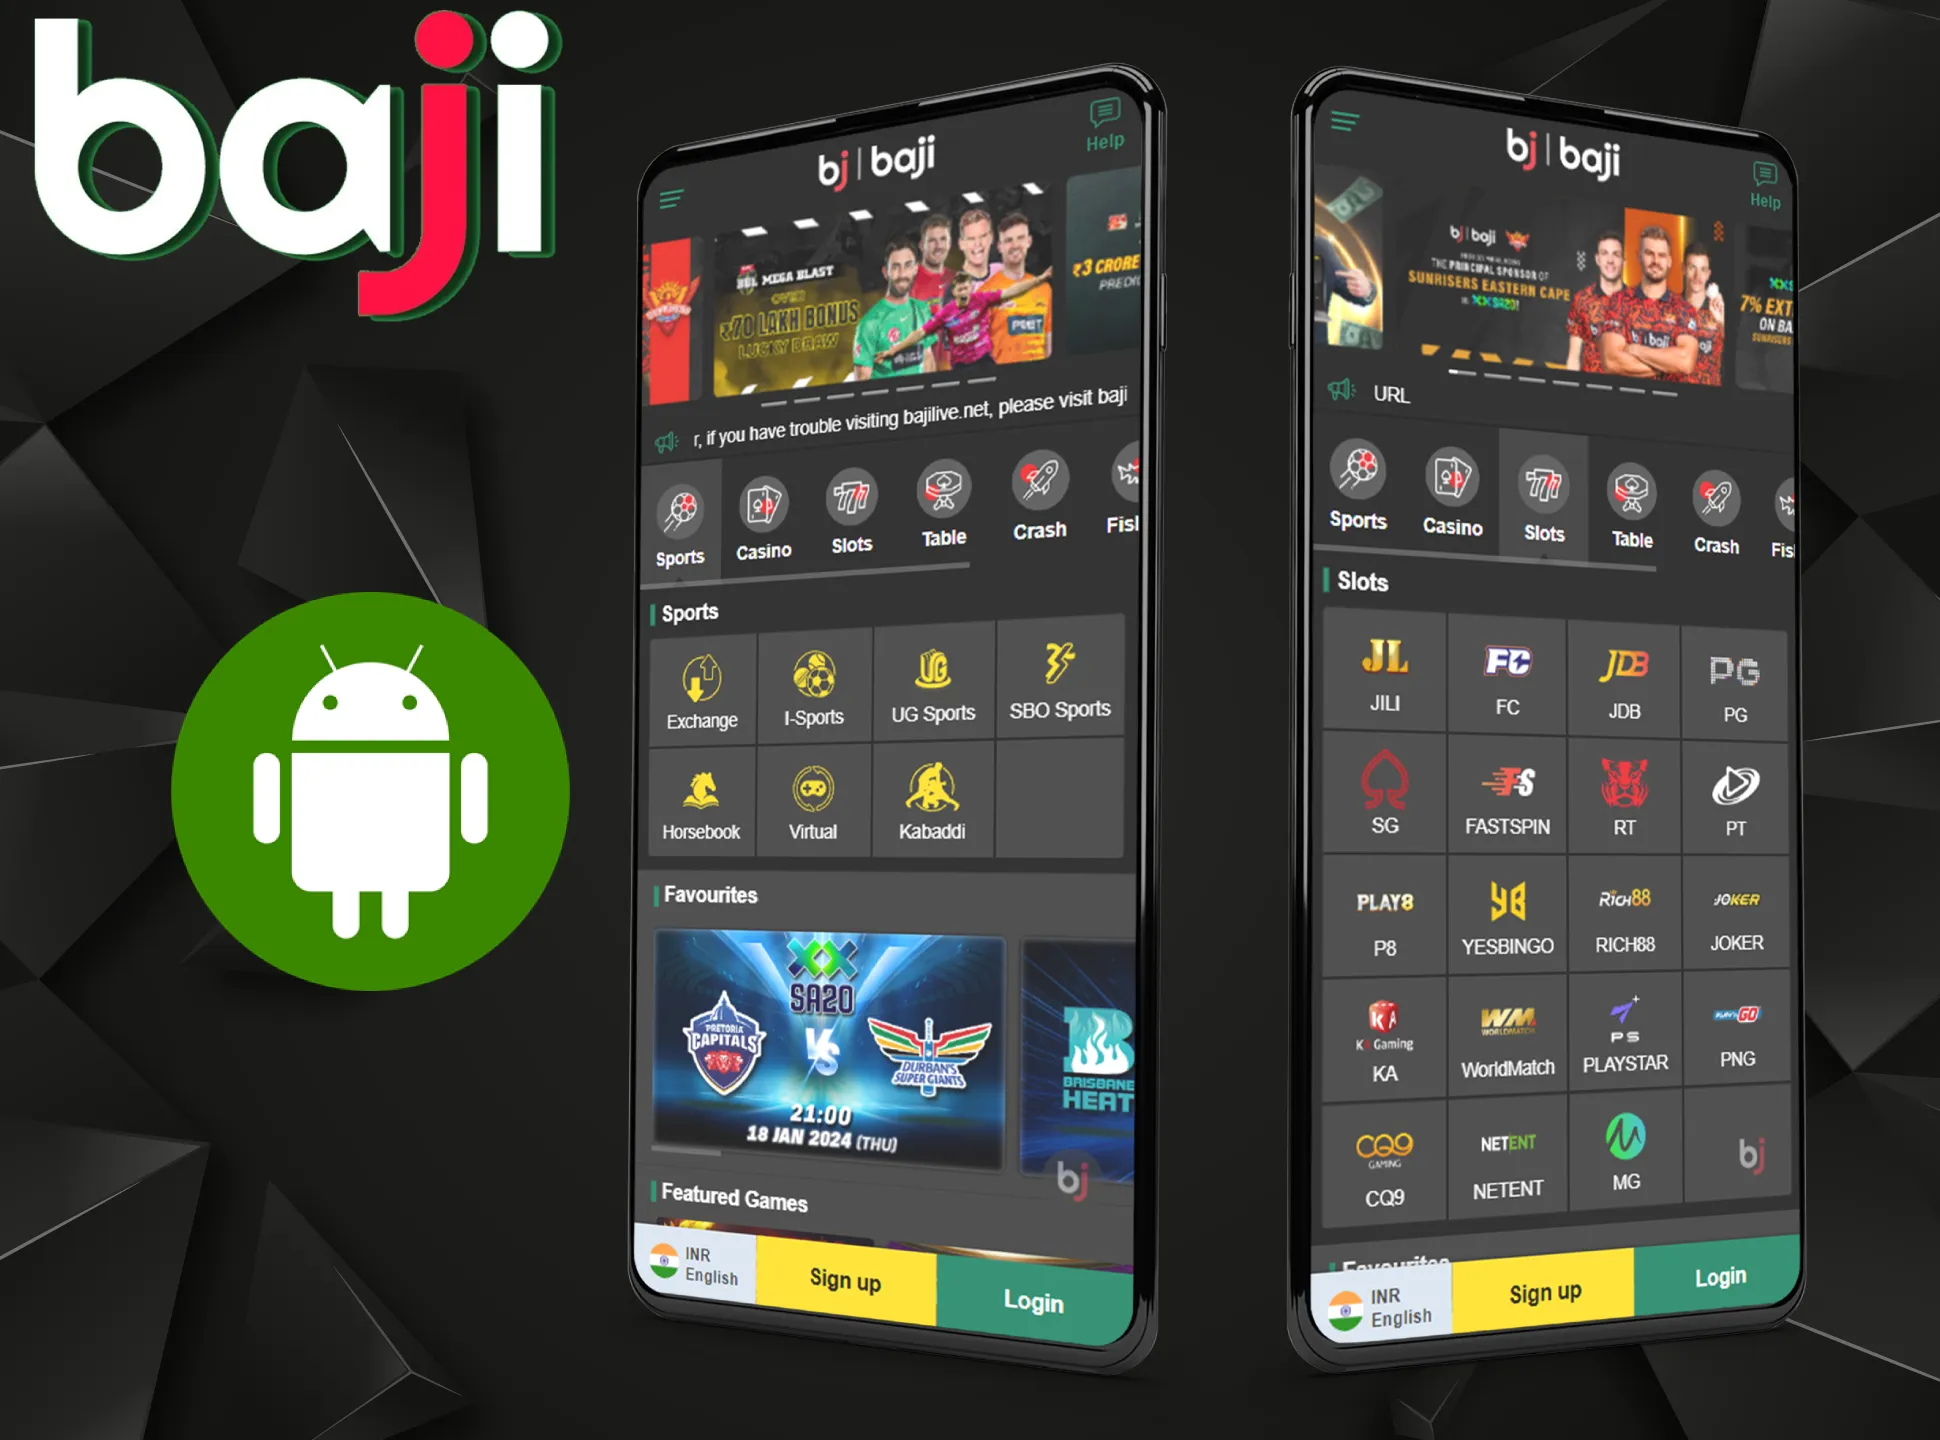 Baji app can be installed on any Android device.